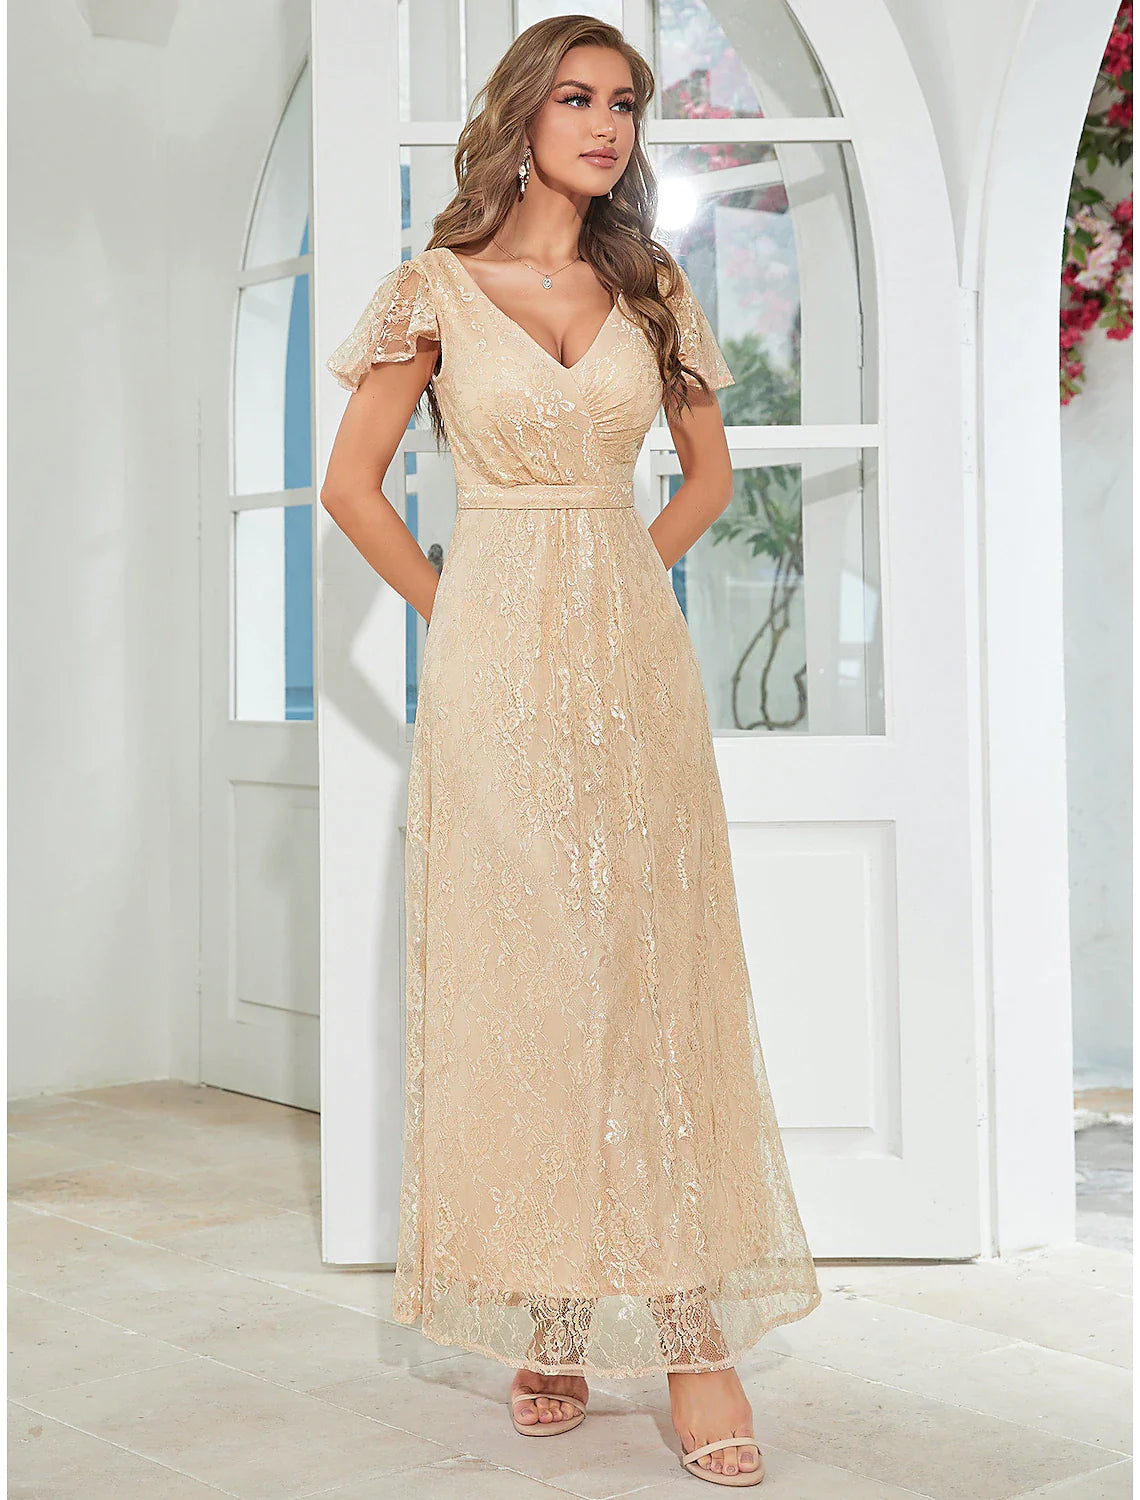 A-Line Wedding Guest Dresses Elegant Dress Party Wear Ankle Length Short Sleeve V Neck Chiffon with Ruffles